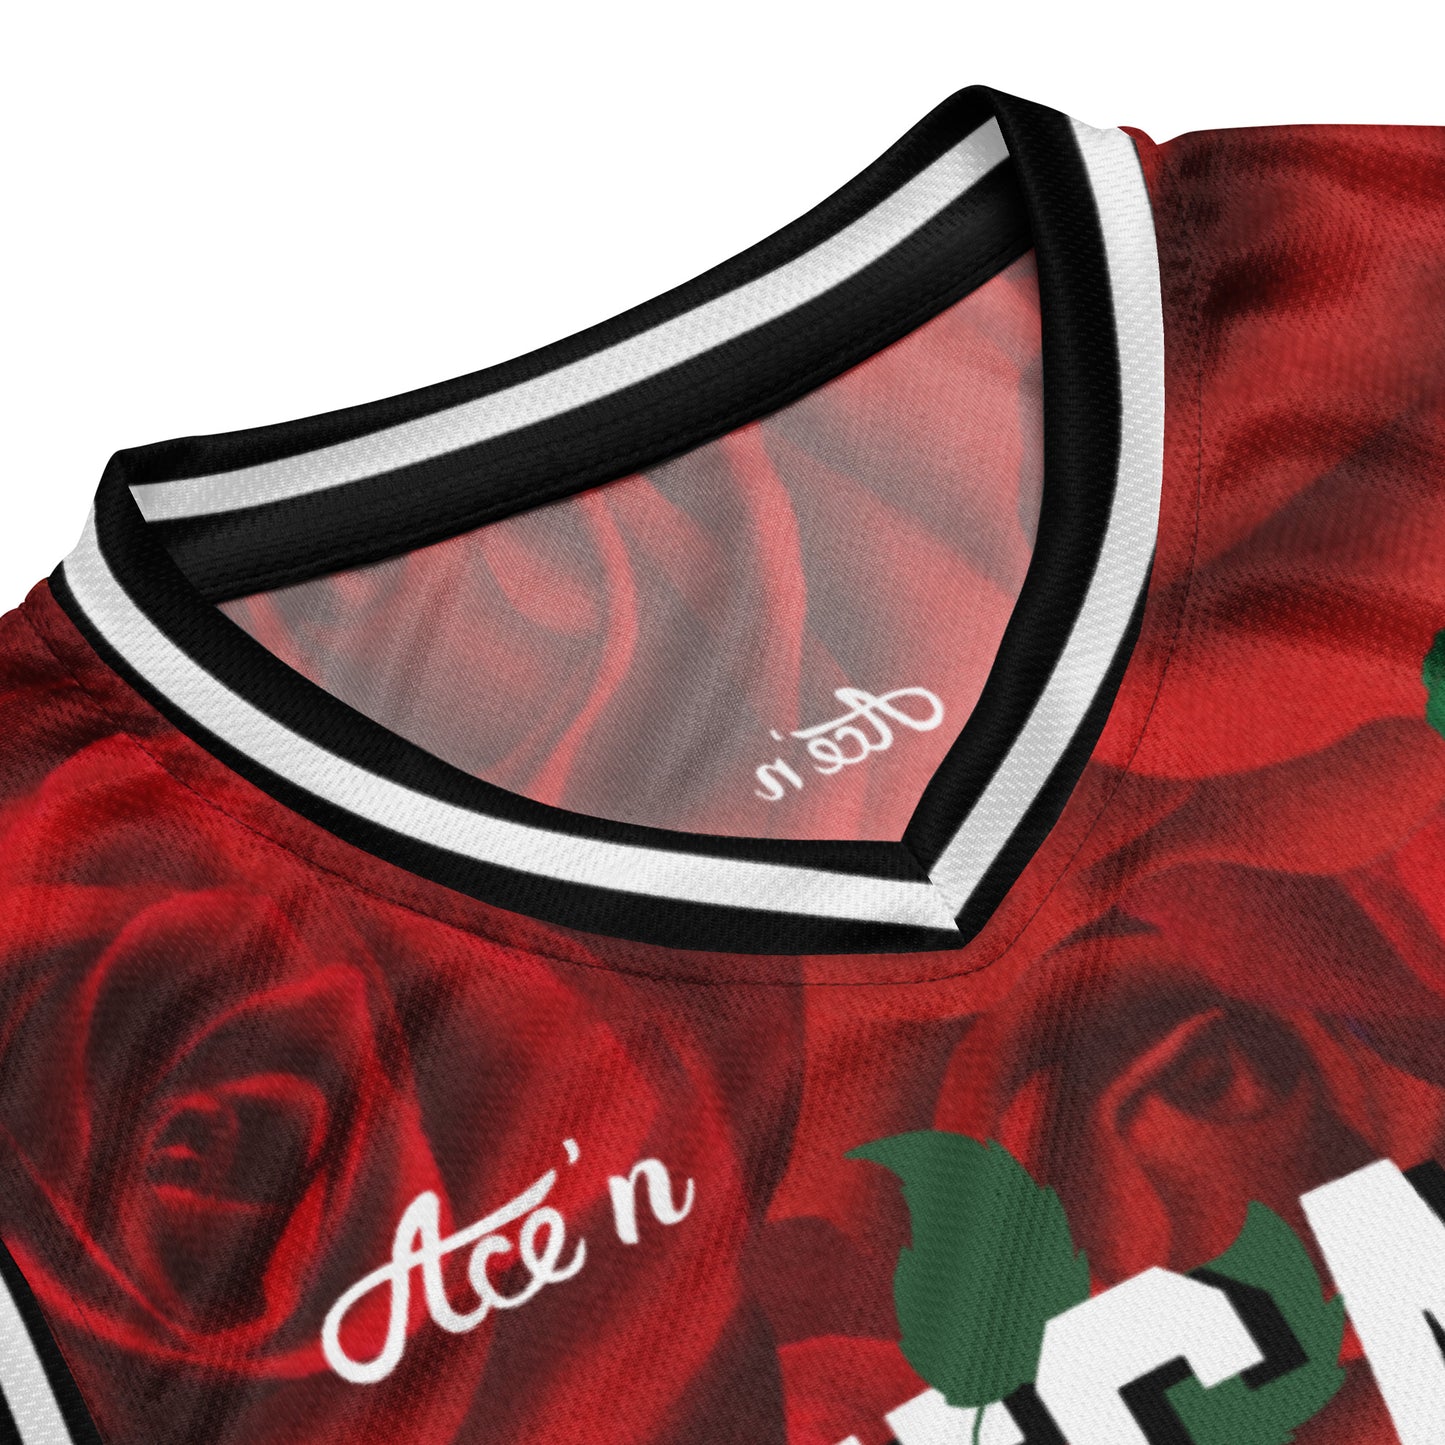 Ace'n "Chicago" Jersey | Rose/#1